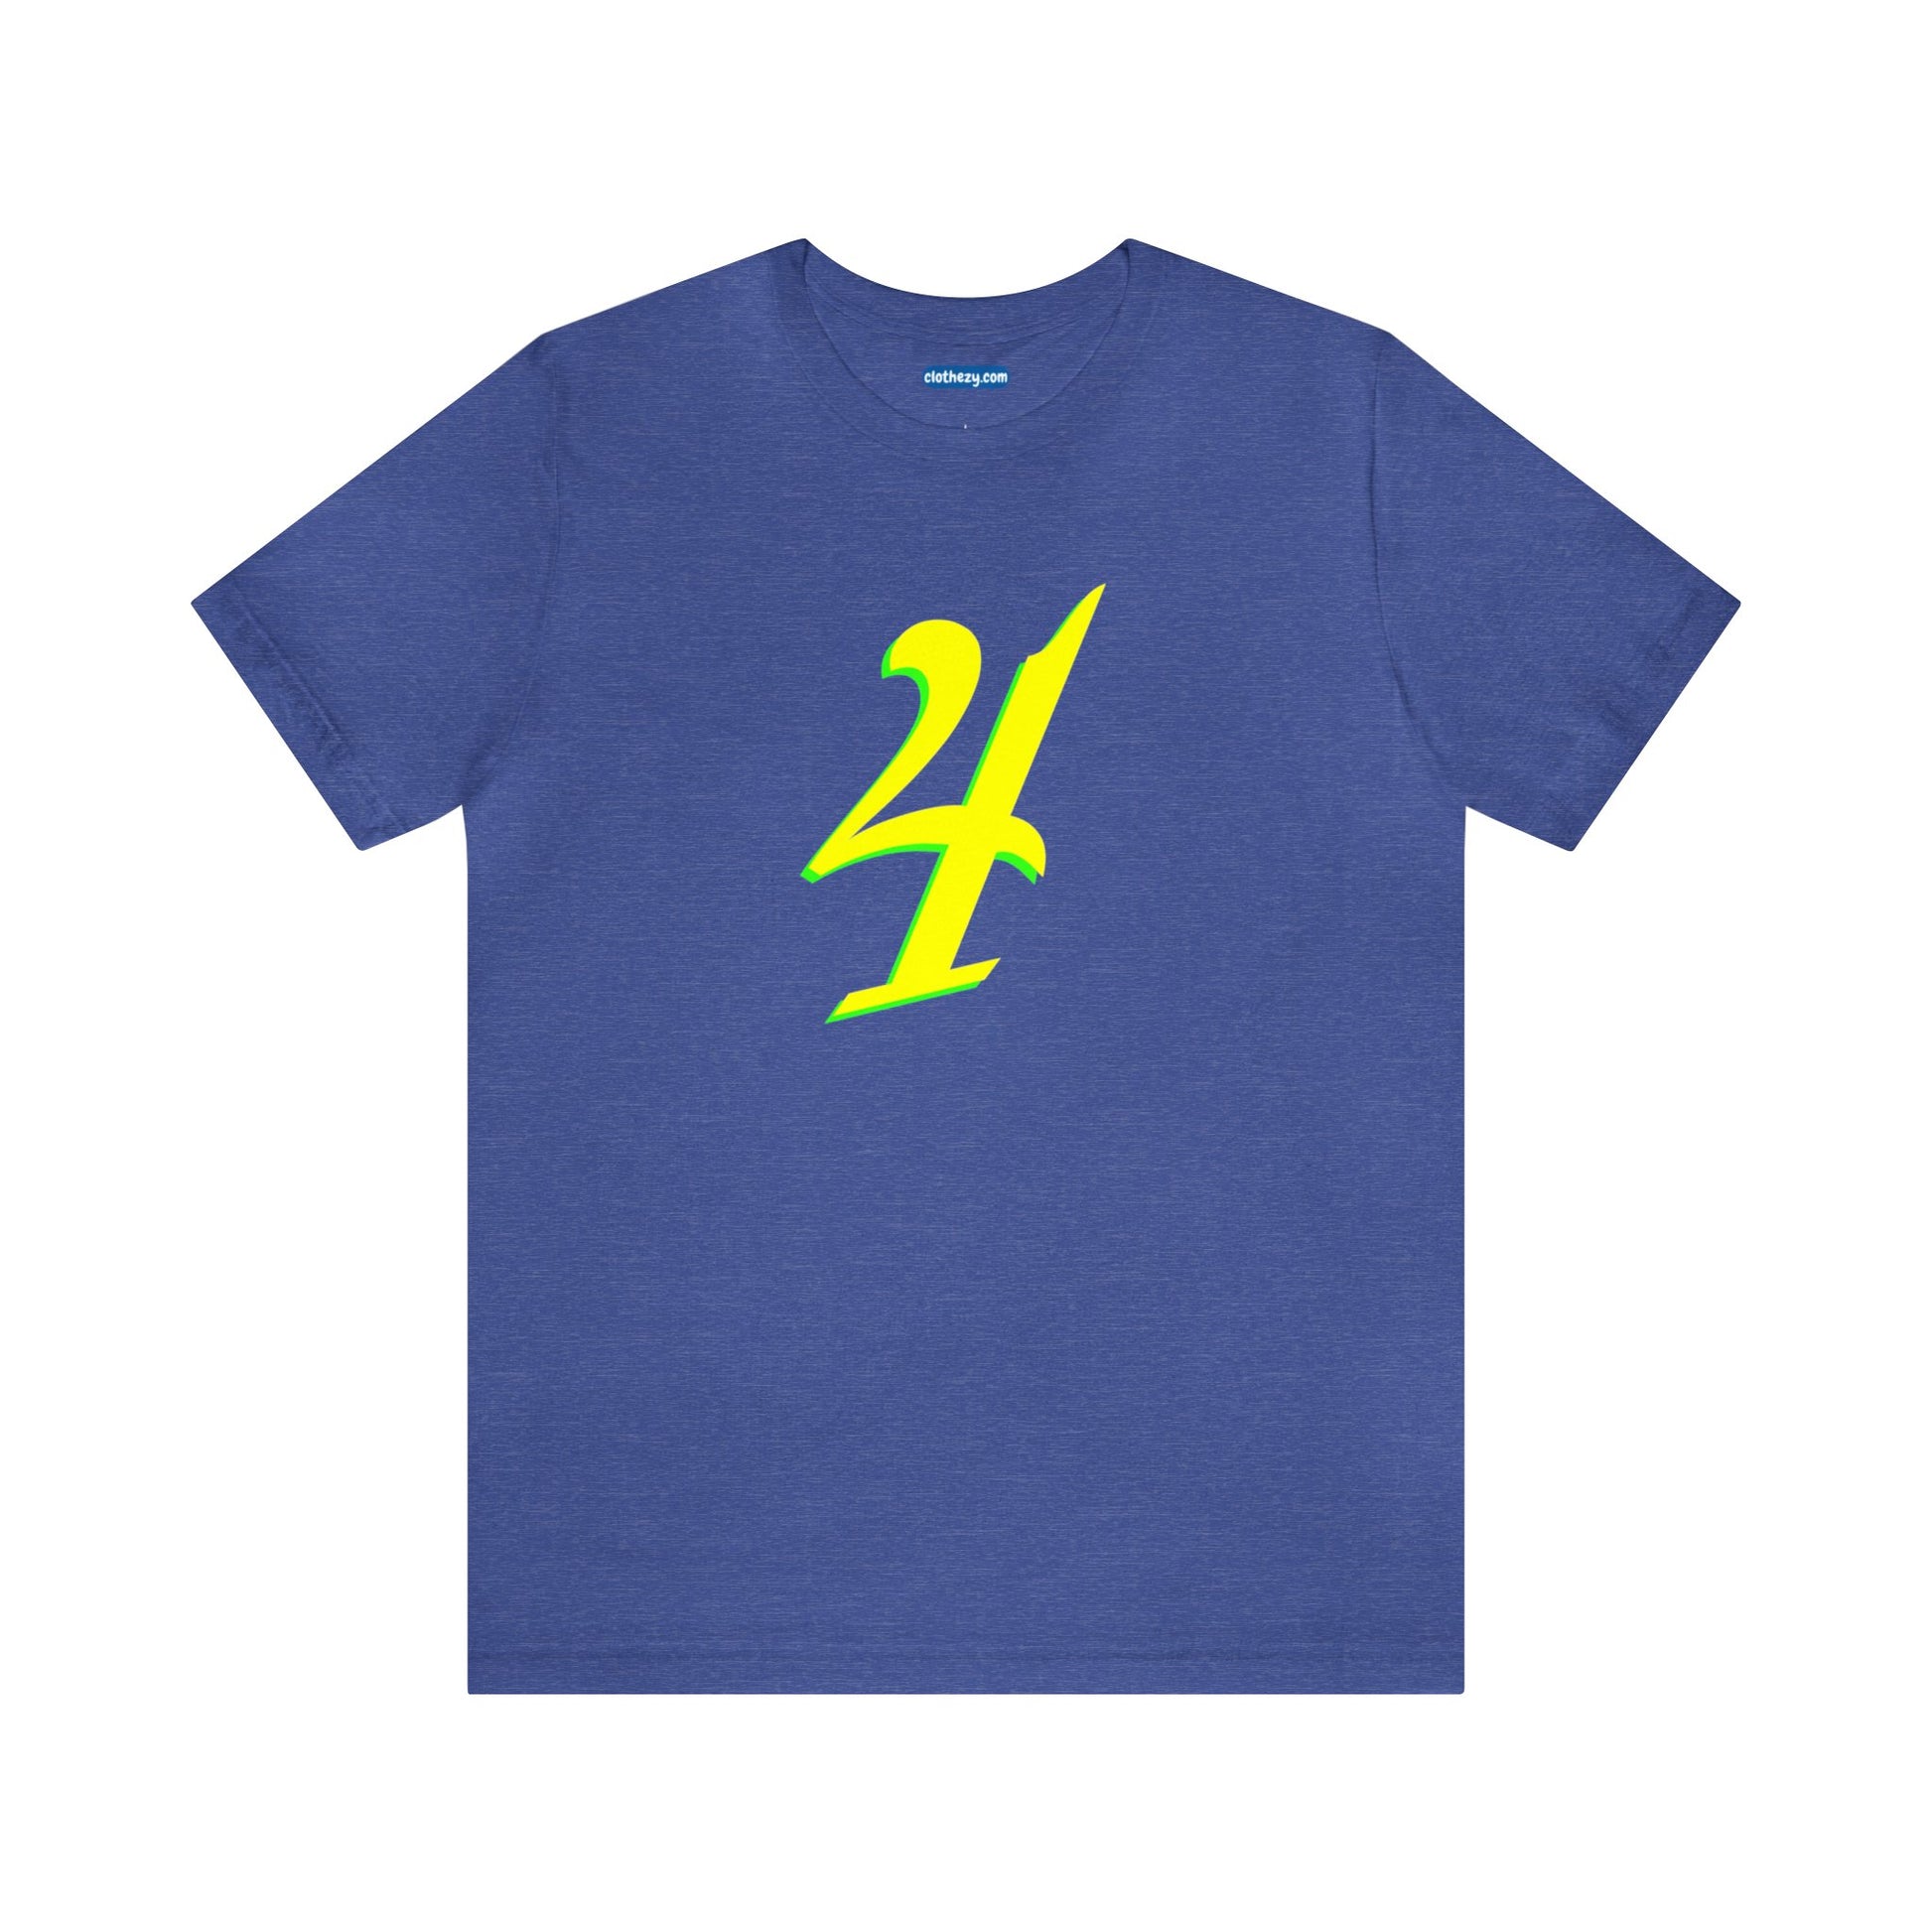 Number 4 Design - Soft Cotton Tee for birthdays and celebrations, Gift for friends and family, Multiple Options by clothezy.com in Royal Blue Heather Size Small - Buy Now